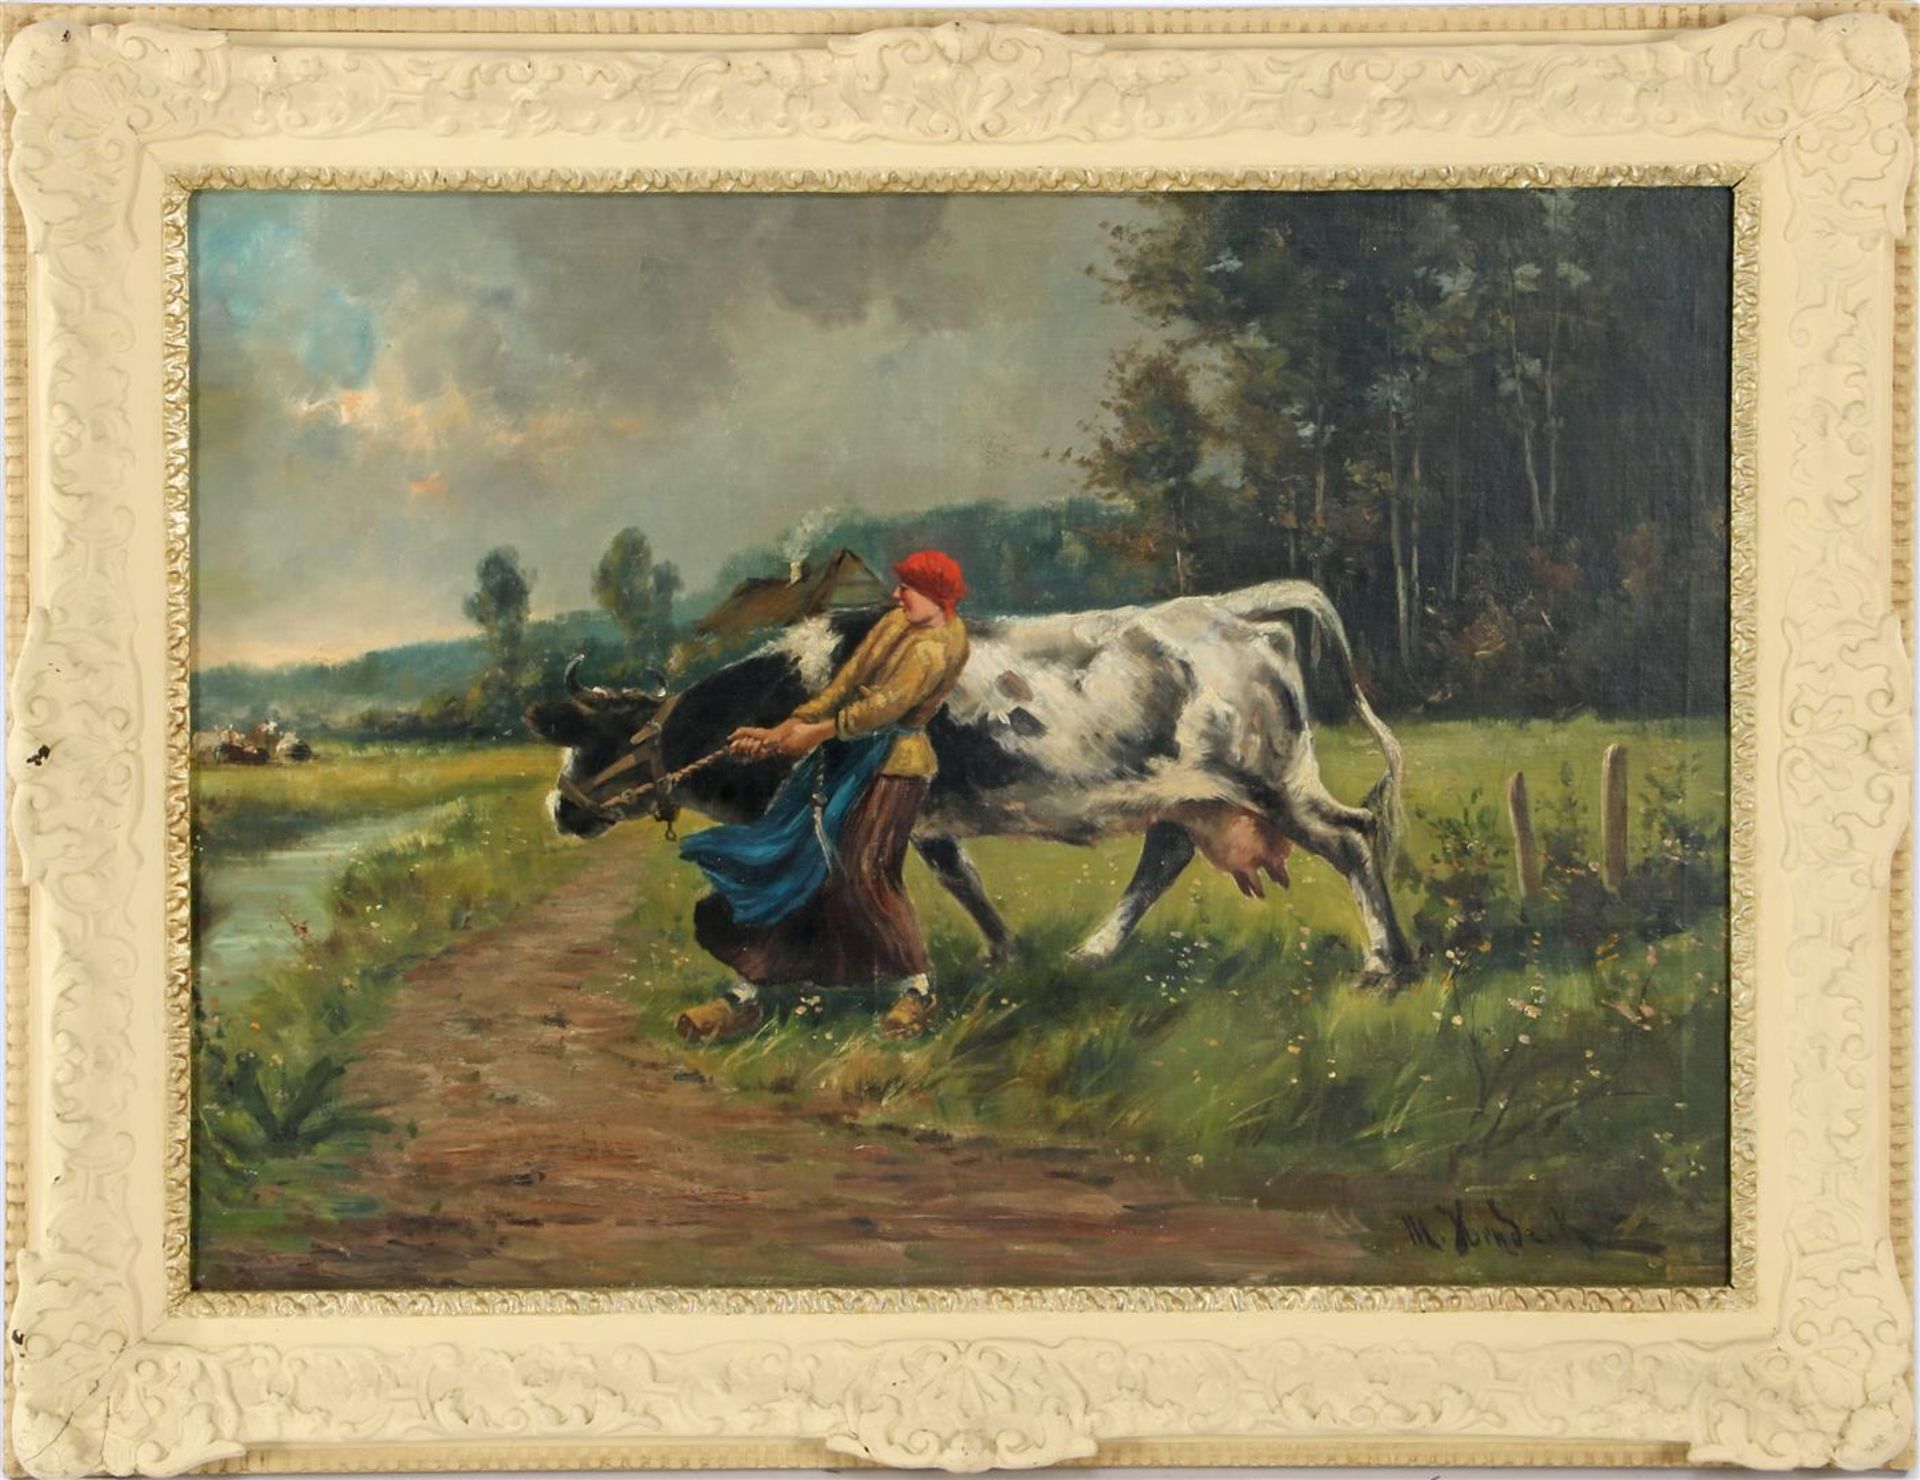 Unclearly signed, farmer's wife with cow 